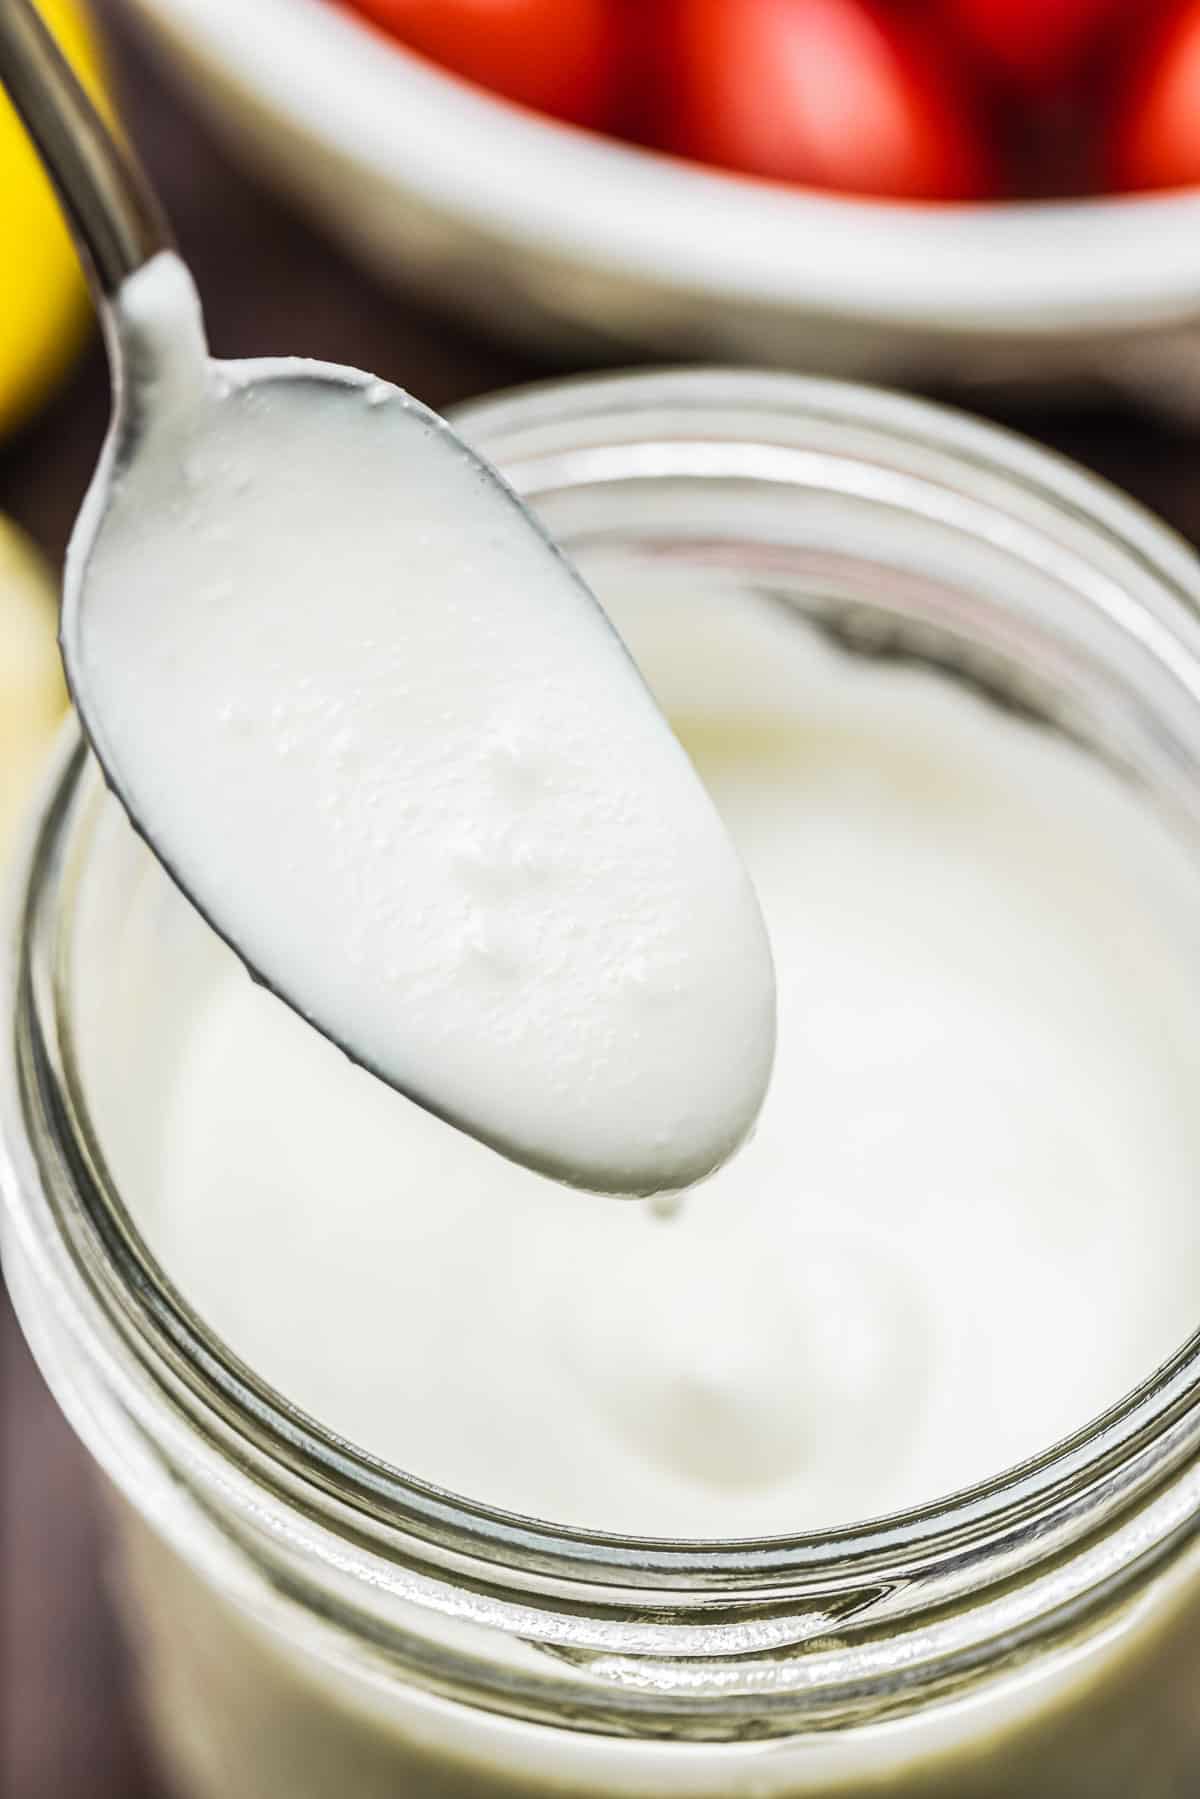 a spoon dipped into feta dressing to show its creaminess.